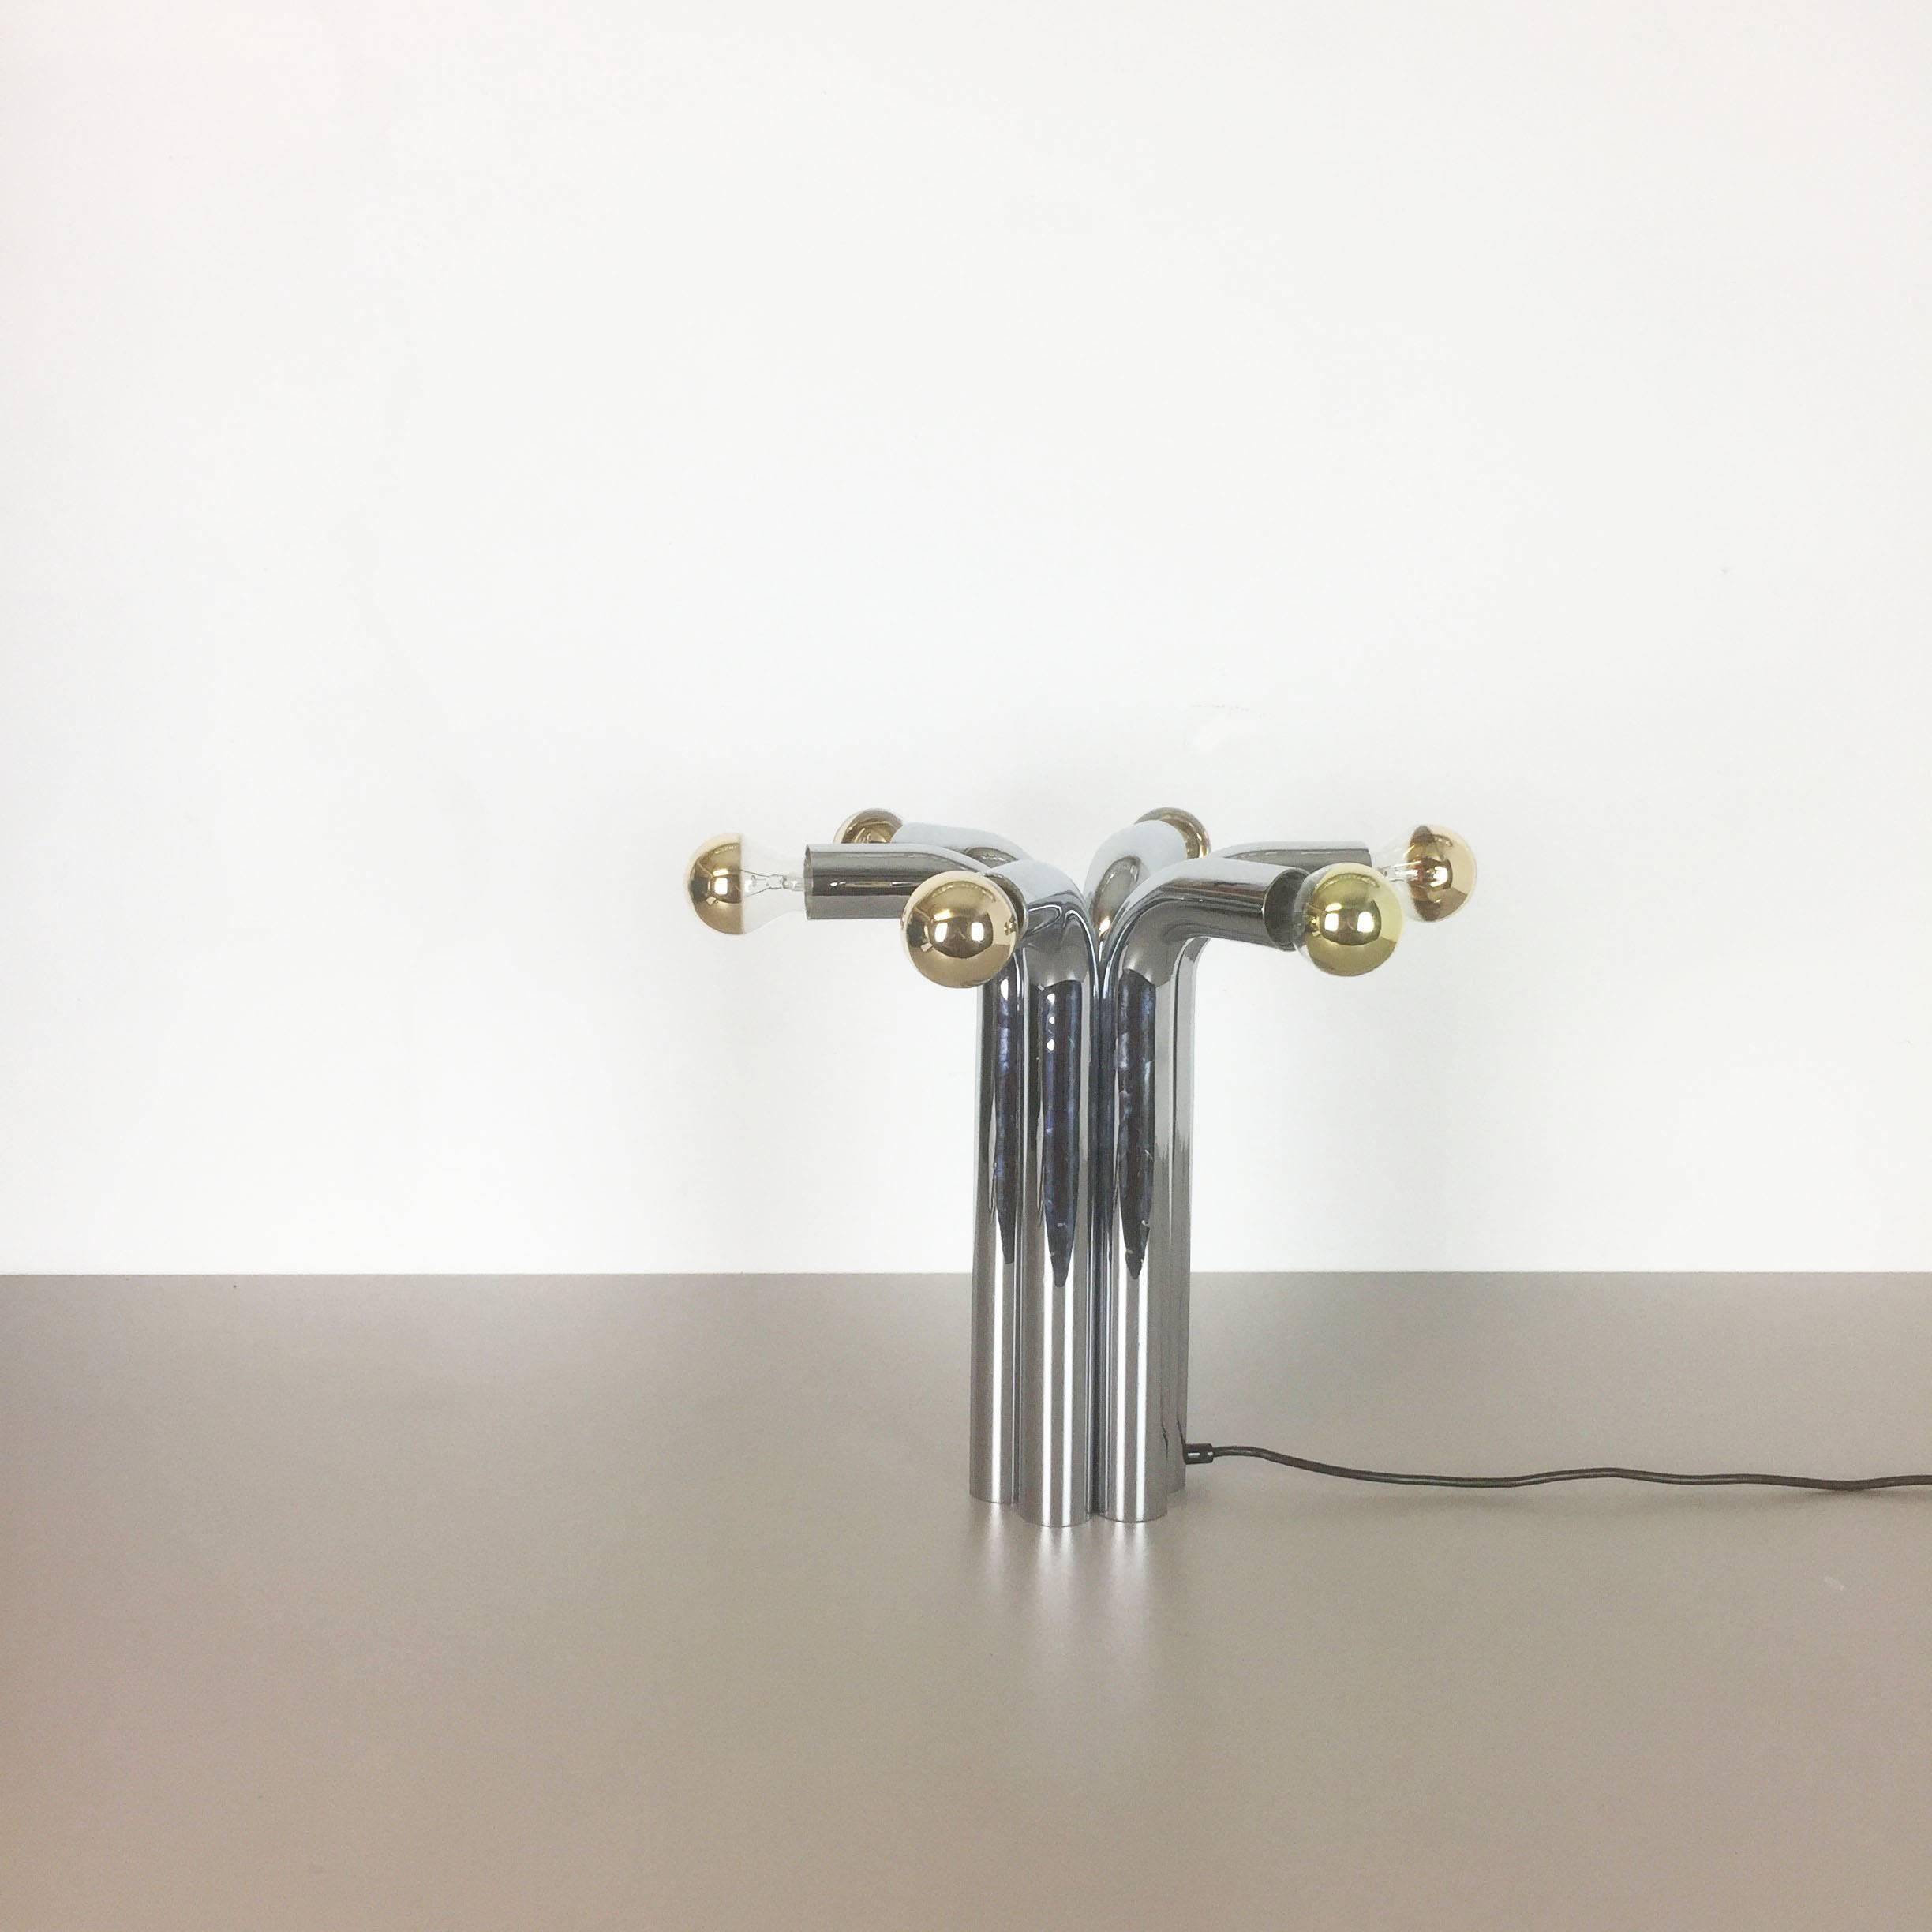 Article:

Sputnik table light


Producer:

Cosack Lights, Germany


Origin:

Germany



Age:

1960s




Description:


This 1960s hanging light was made by Cosack Lights in Germany. The light is made of solid metal in